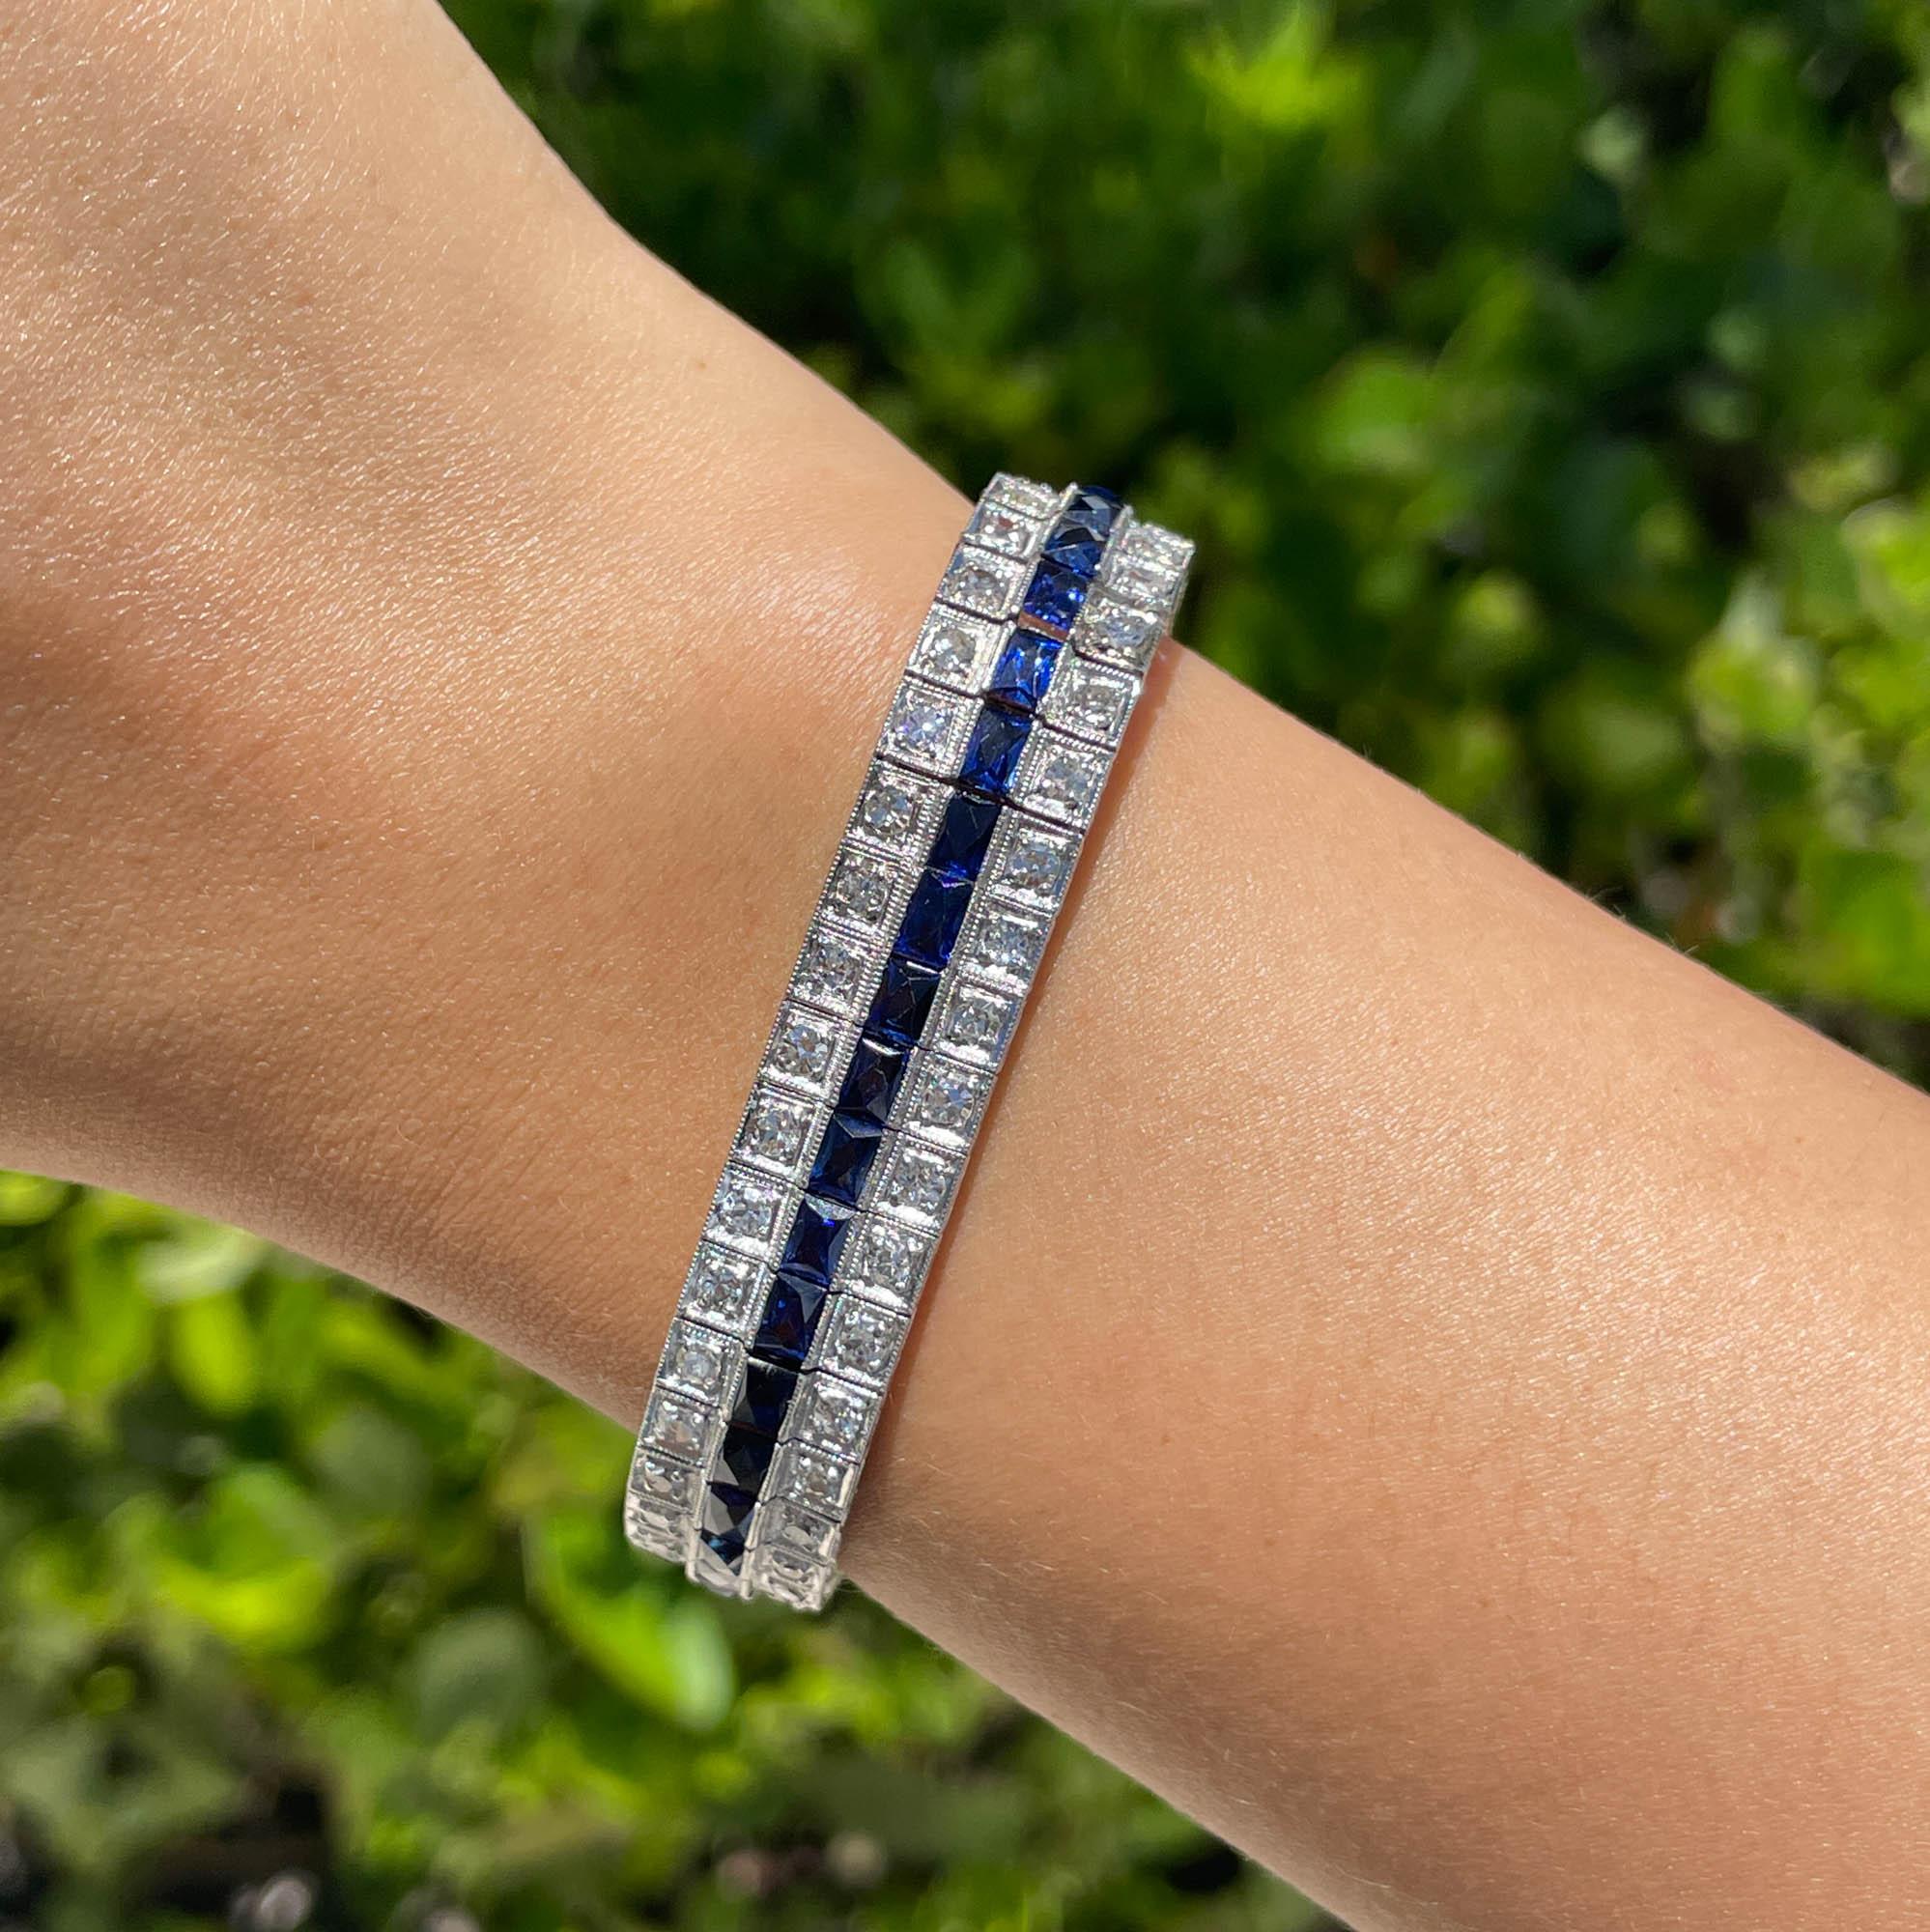 Jay Feder Art Deco Platinum Blue Sapphire and Diamond Bracelet
There are 42 Blue Sapphires; estimated total weight is 8.4 carats. 
Set with 84 round diamonds; total carat weight is 4.2ct approx. 
The bracelet is  6.75 inches long and weighs 30.6